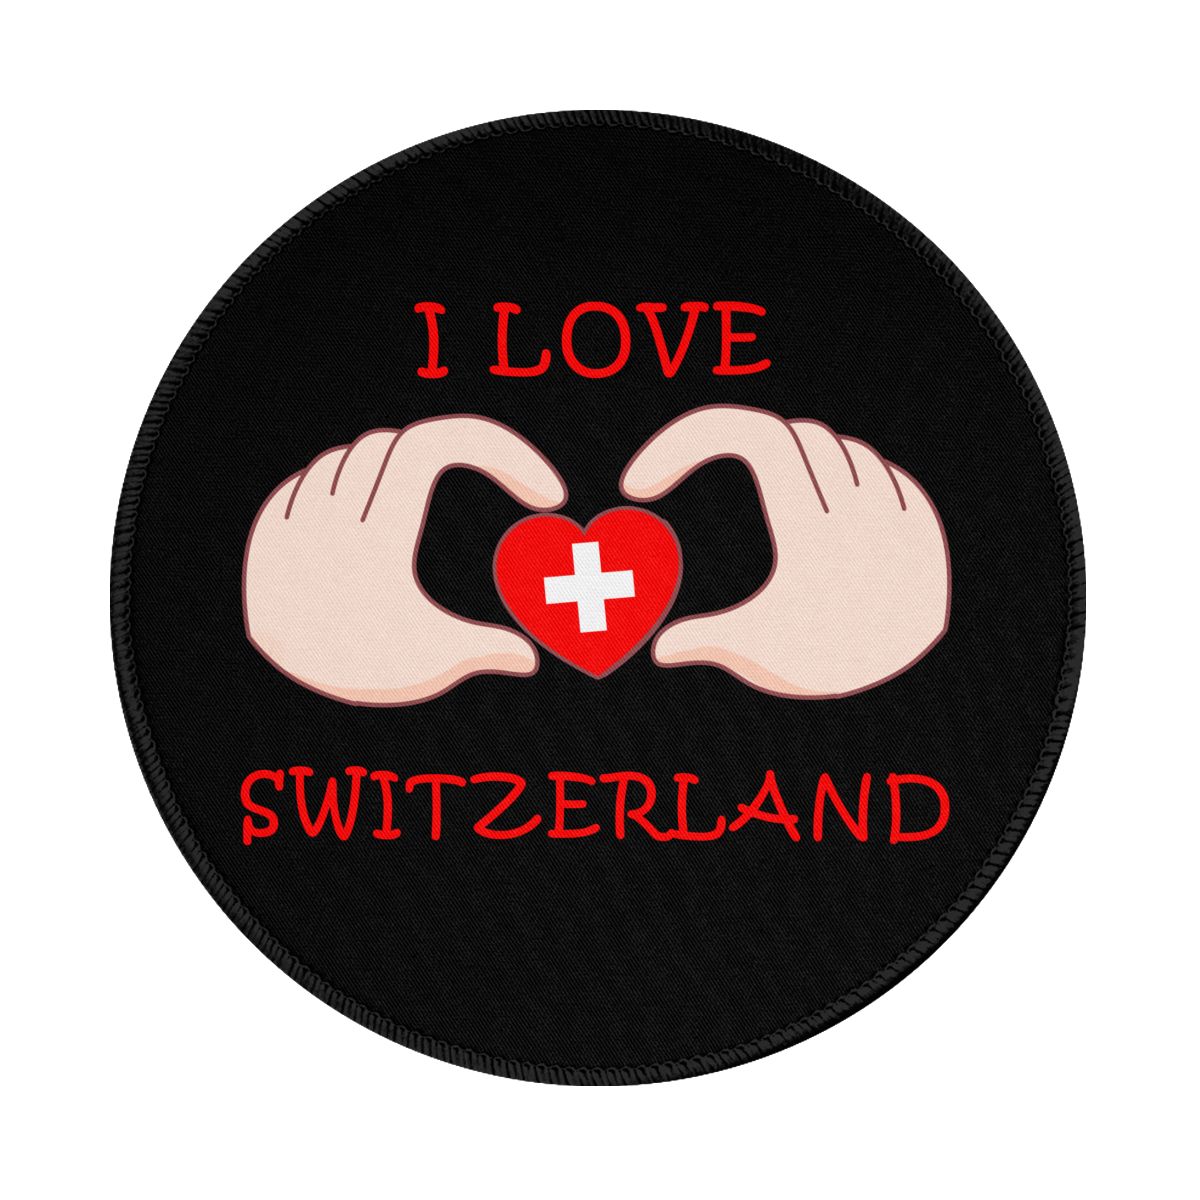 I Love Switzerland Waterproof Round Mouse Pad for Wireless Mouse